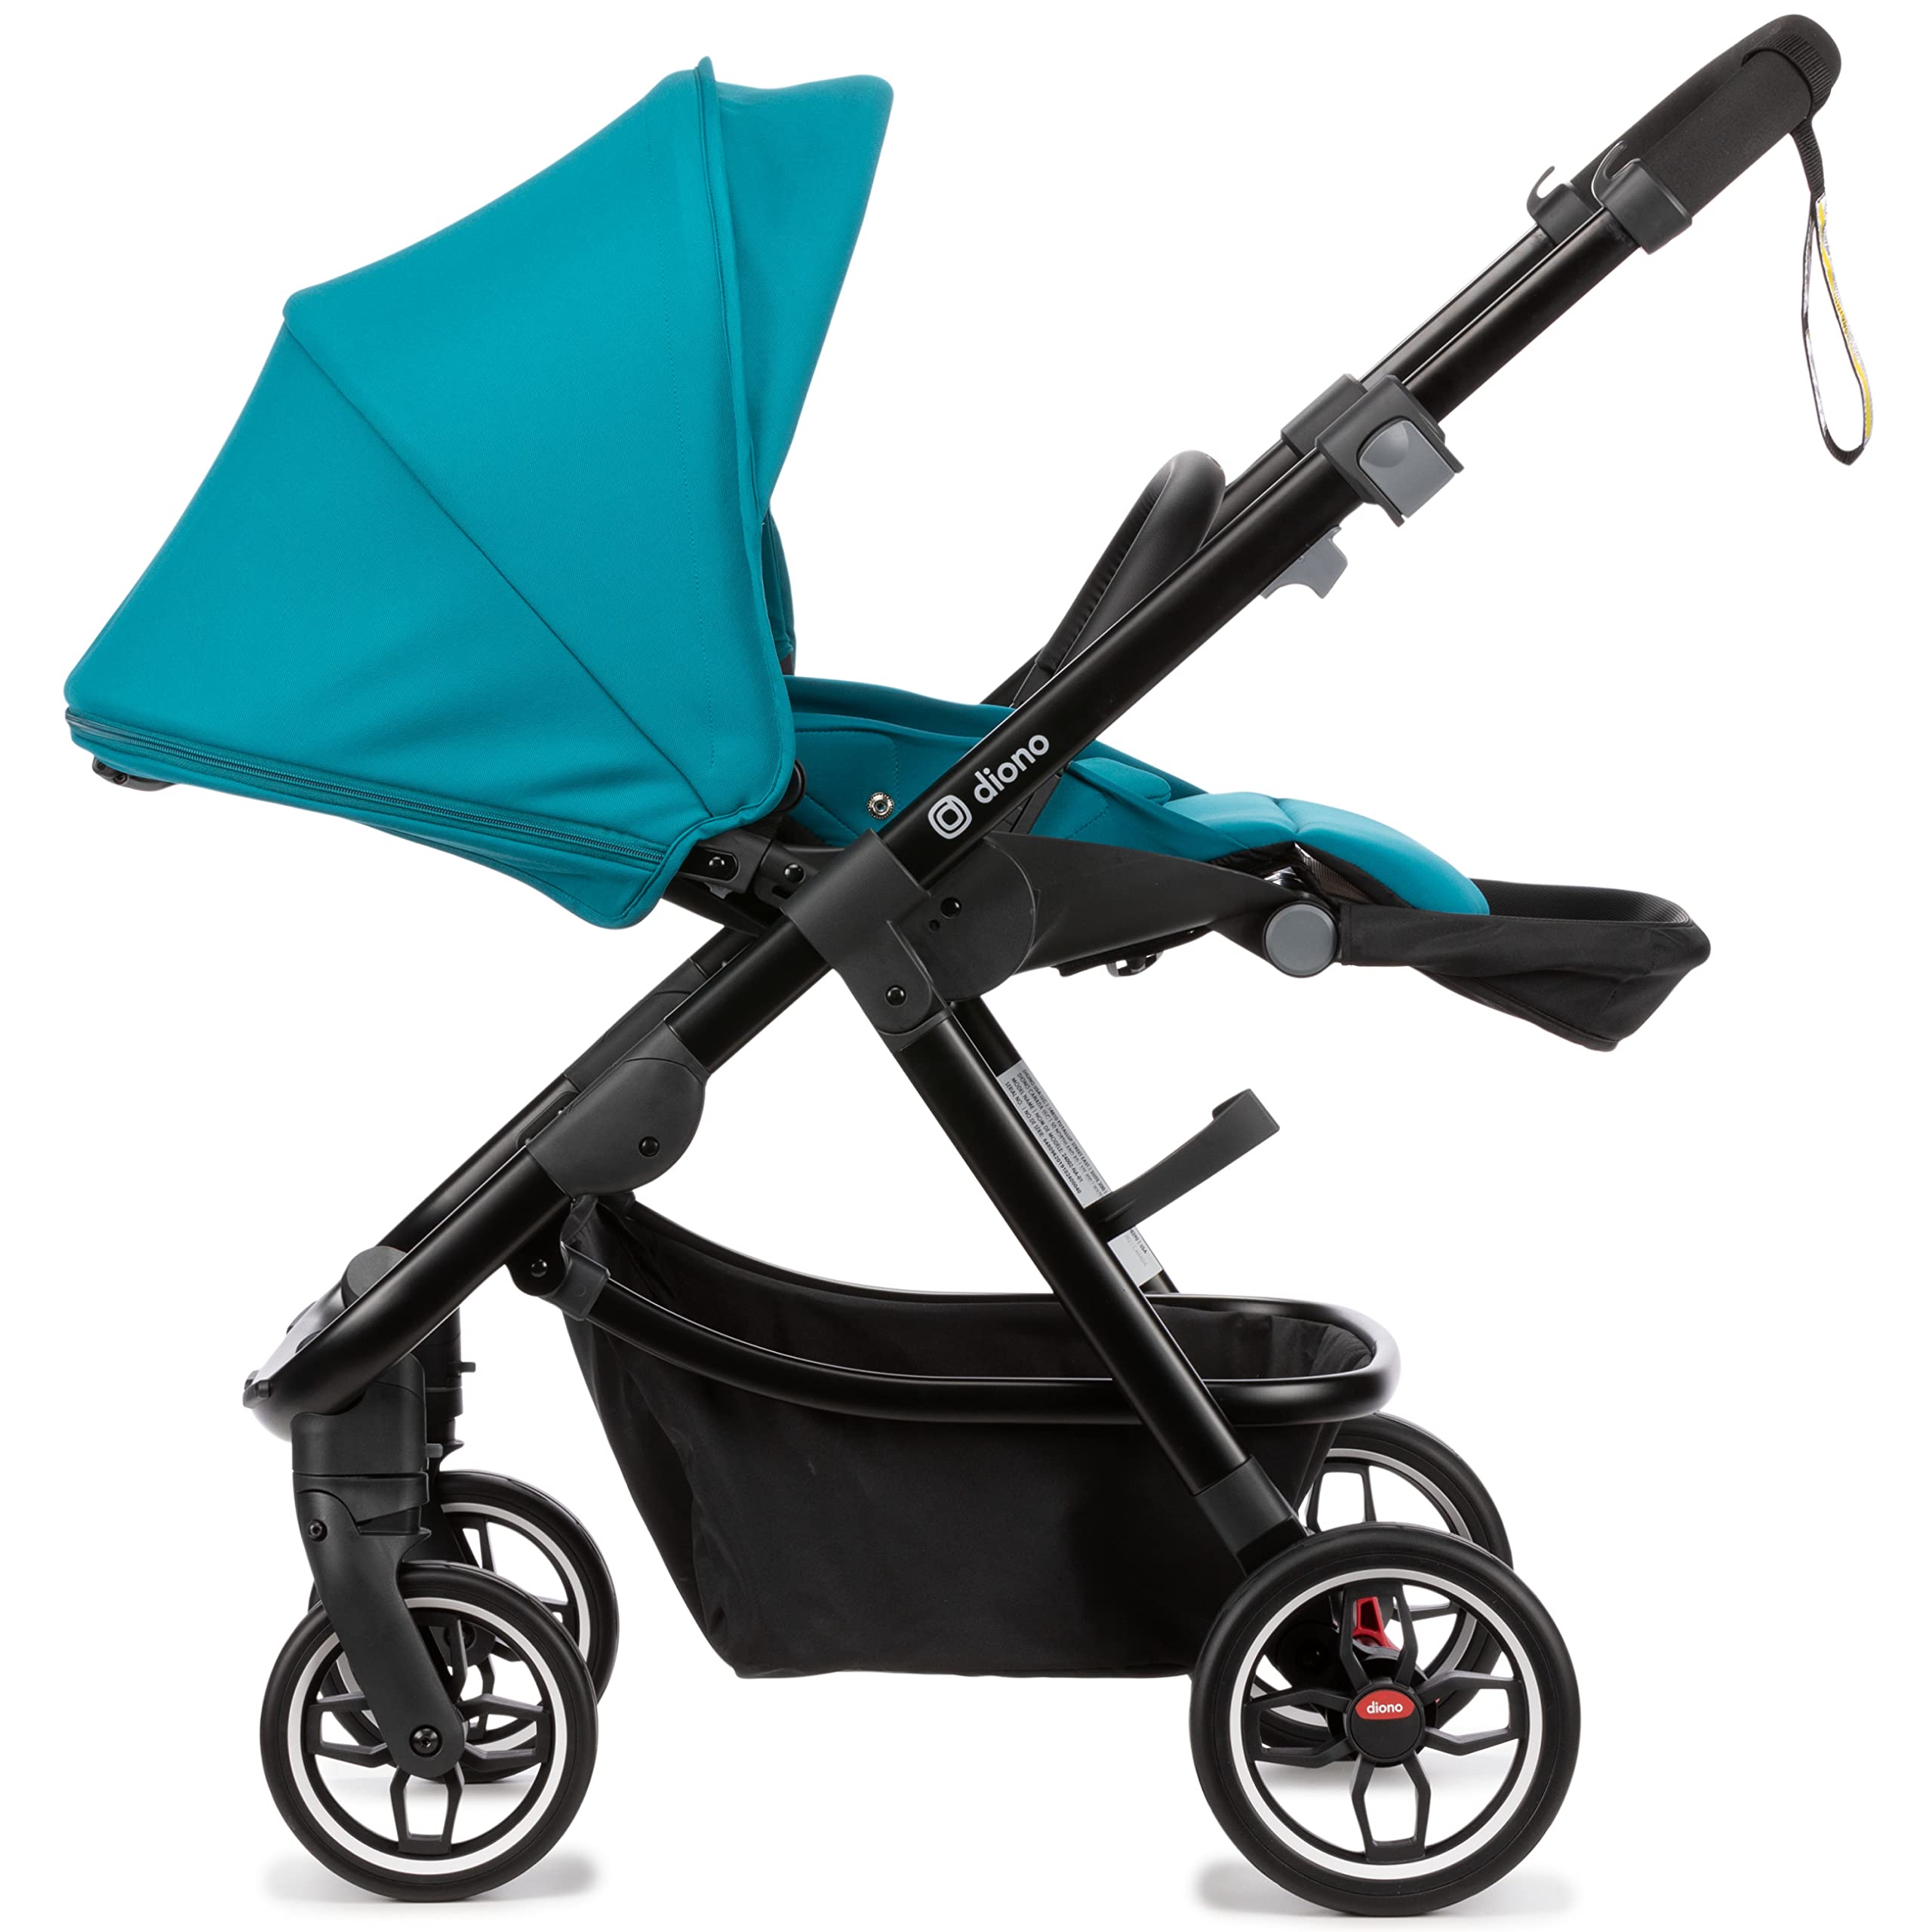 Diono Excurze Baby, Infant, Toddler Stroller, Perfect City Travel System Stroller and Car Seat Compatible, Adaptors Included Compact Fold, Narrow Ride, XL Storage Basket, Blue Turquoise